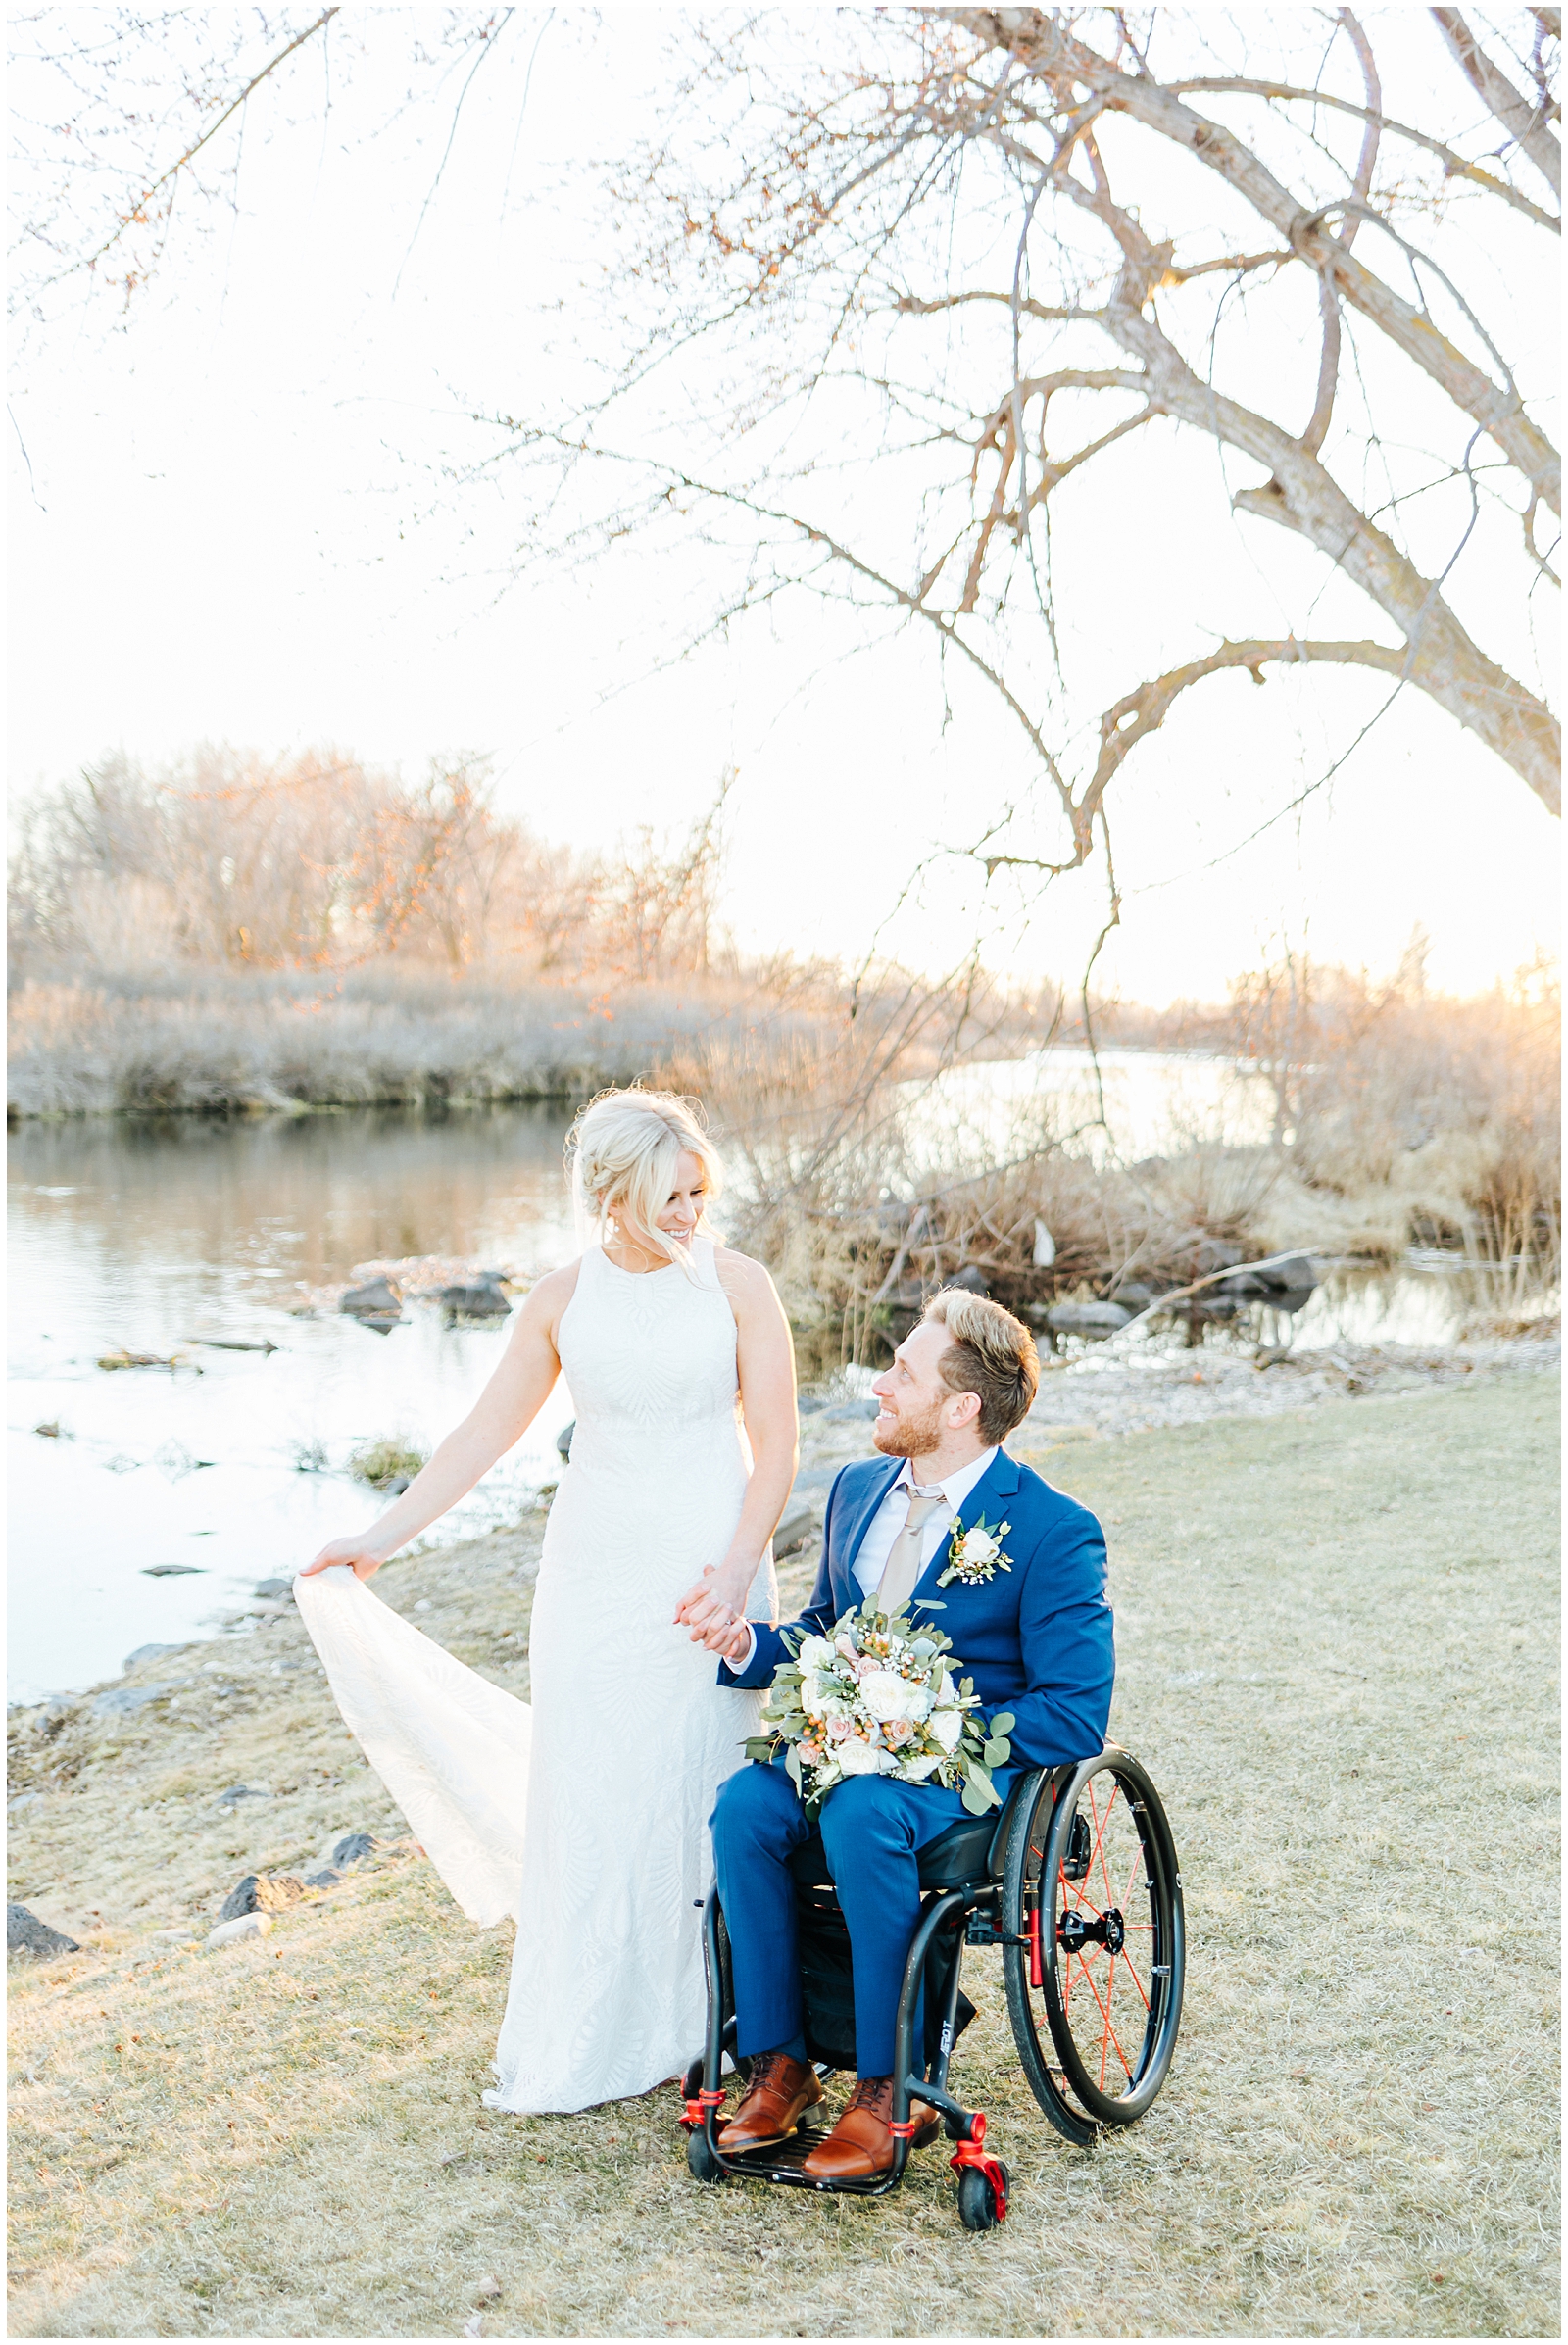 Heartfelt Idaho Spring Elopement by the Boise River at White Willow Estate